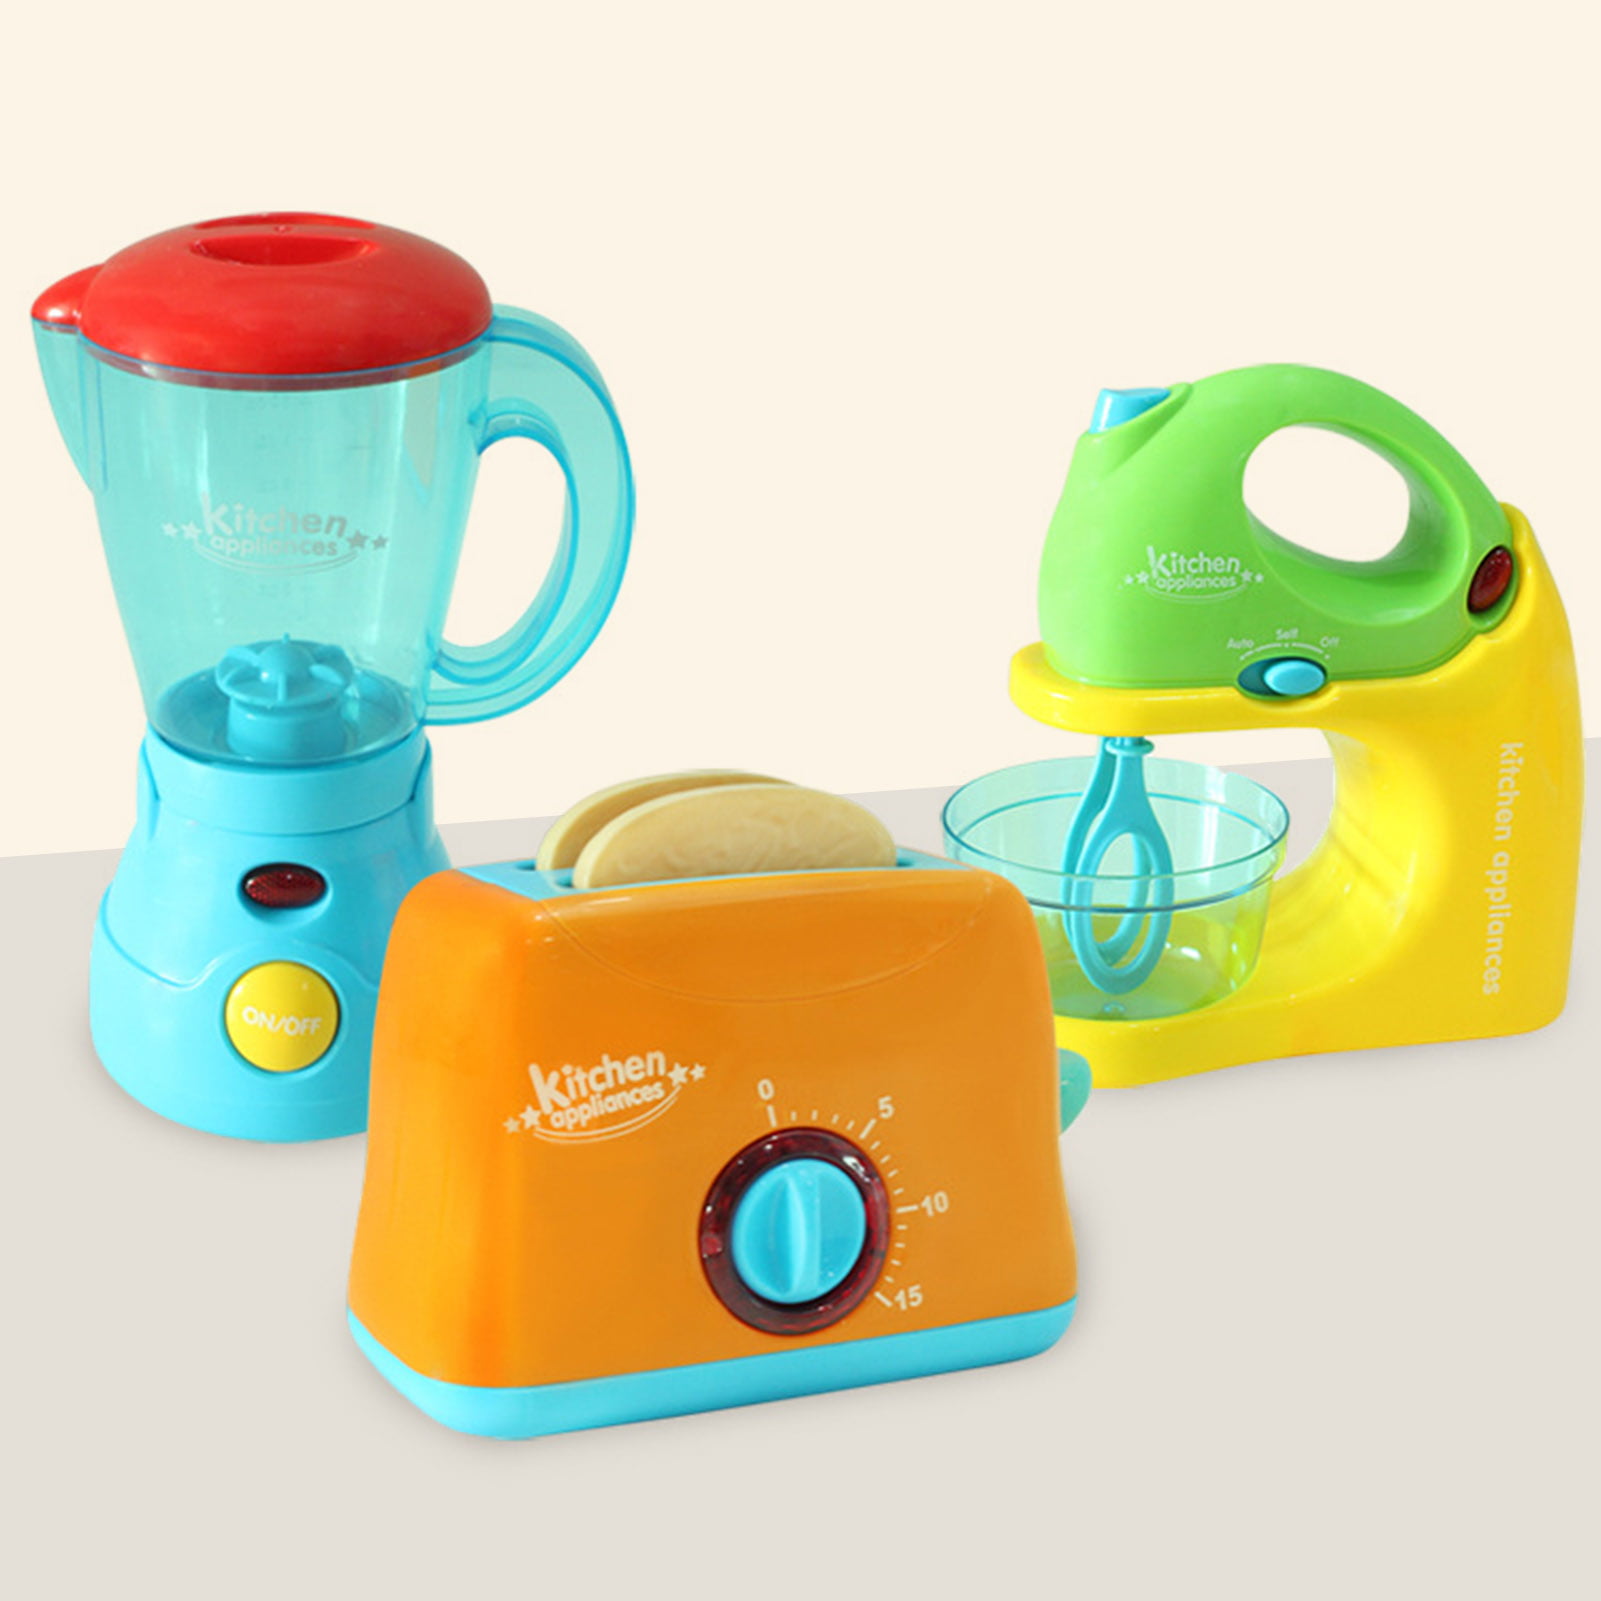 Kitchen Appliances Toy,Kids Kitchen Pretend Accessories Play Set,Coffee  Maker Machine,Blender,Mixer and Kettle with Realistic Light and Sounds,Play